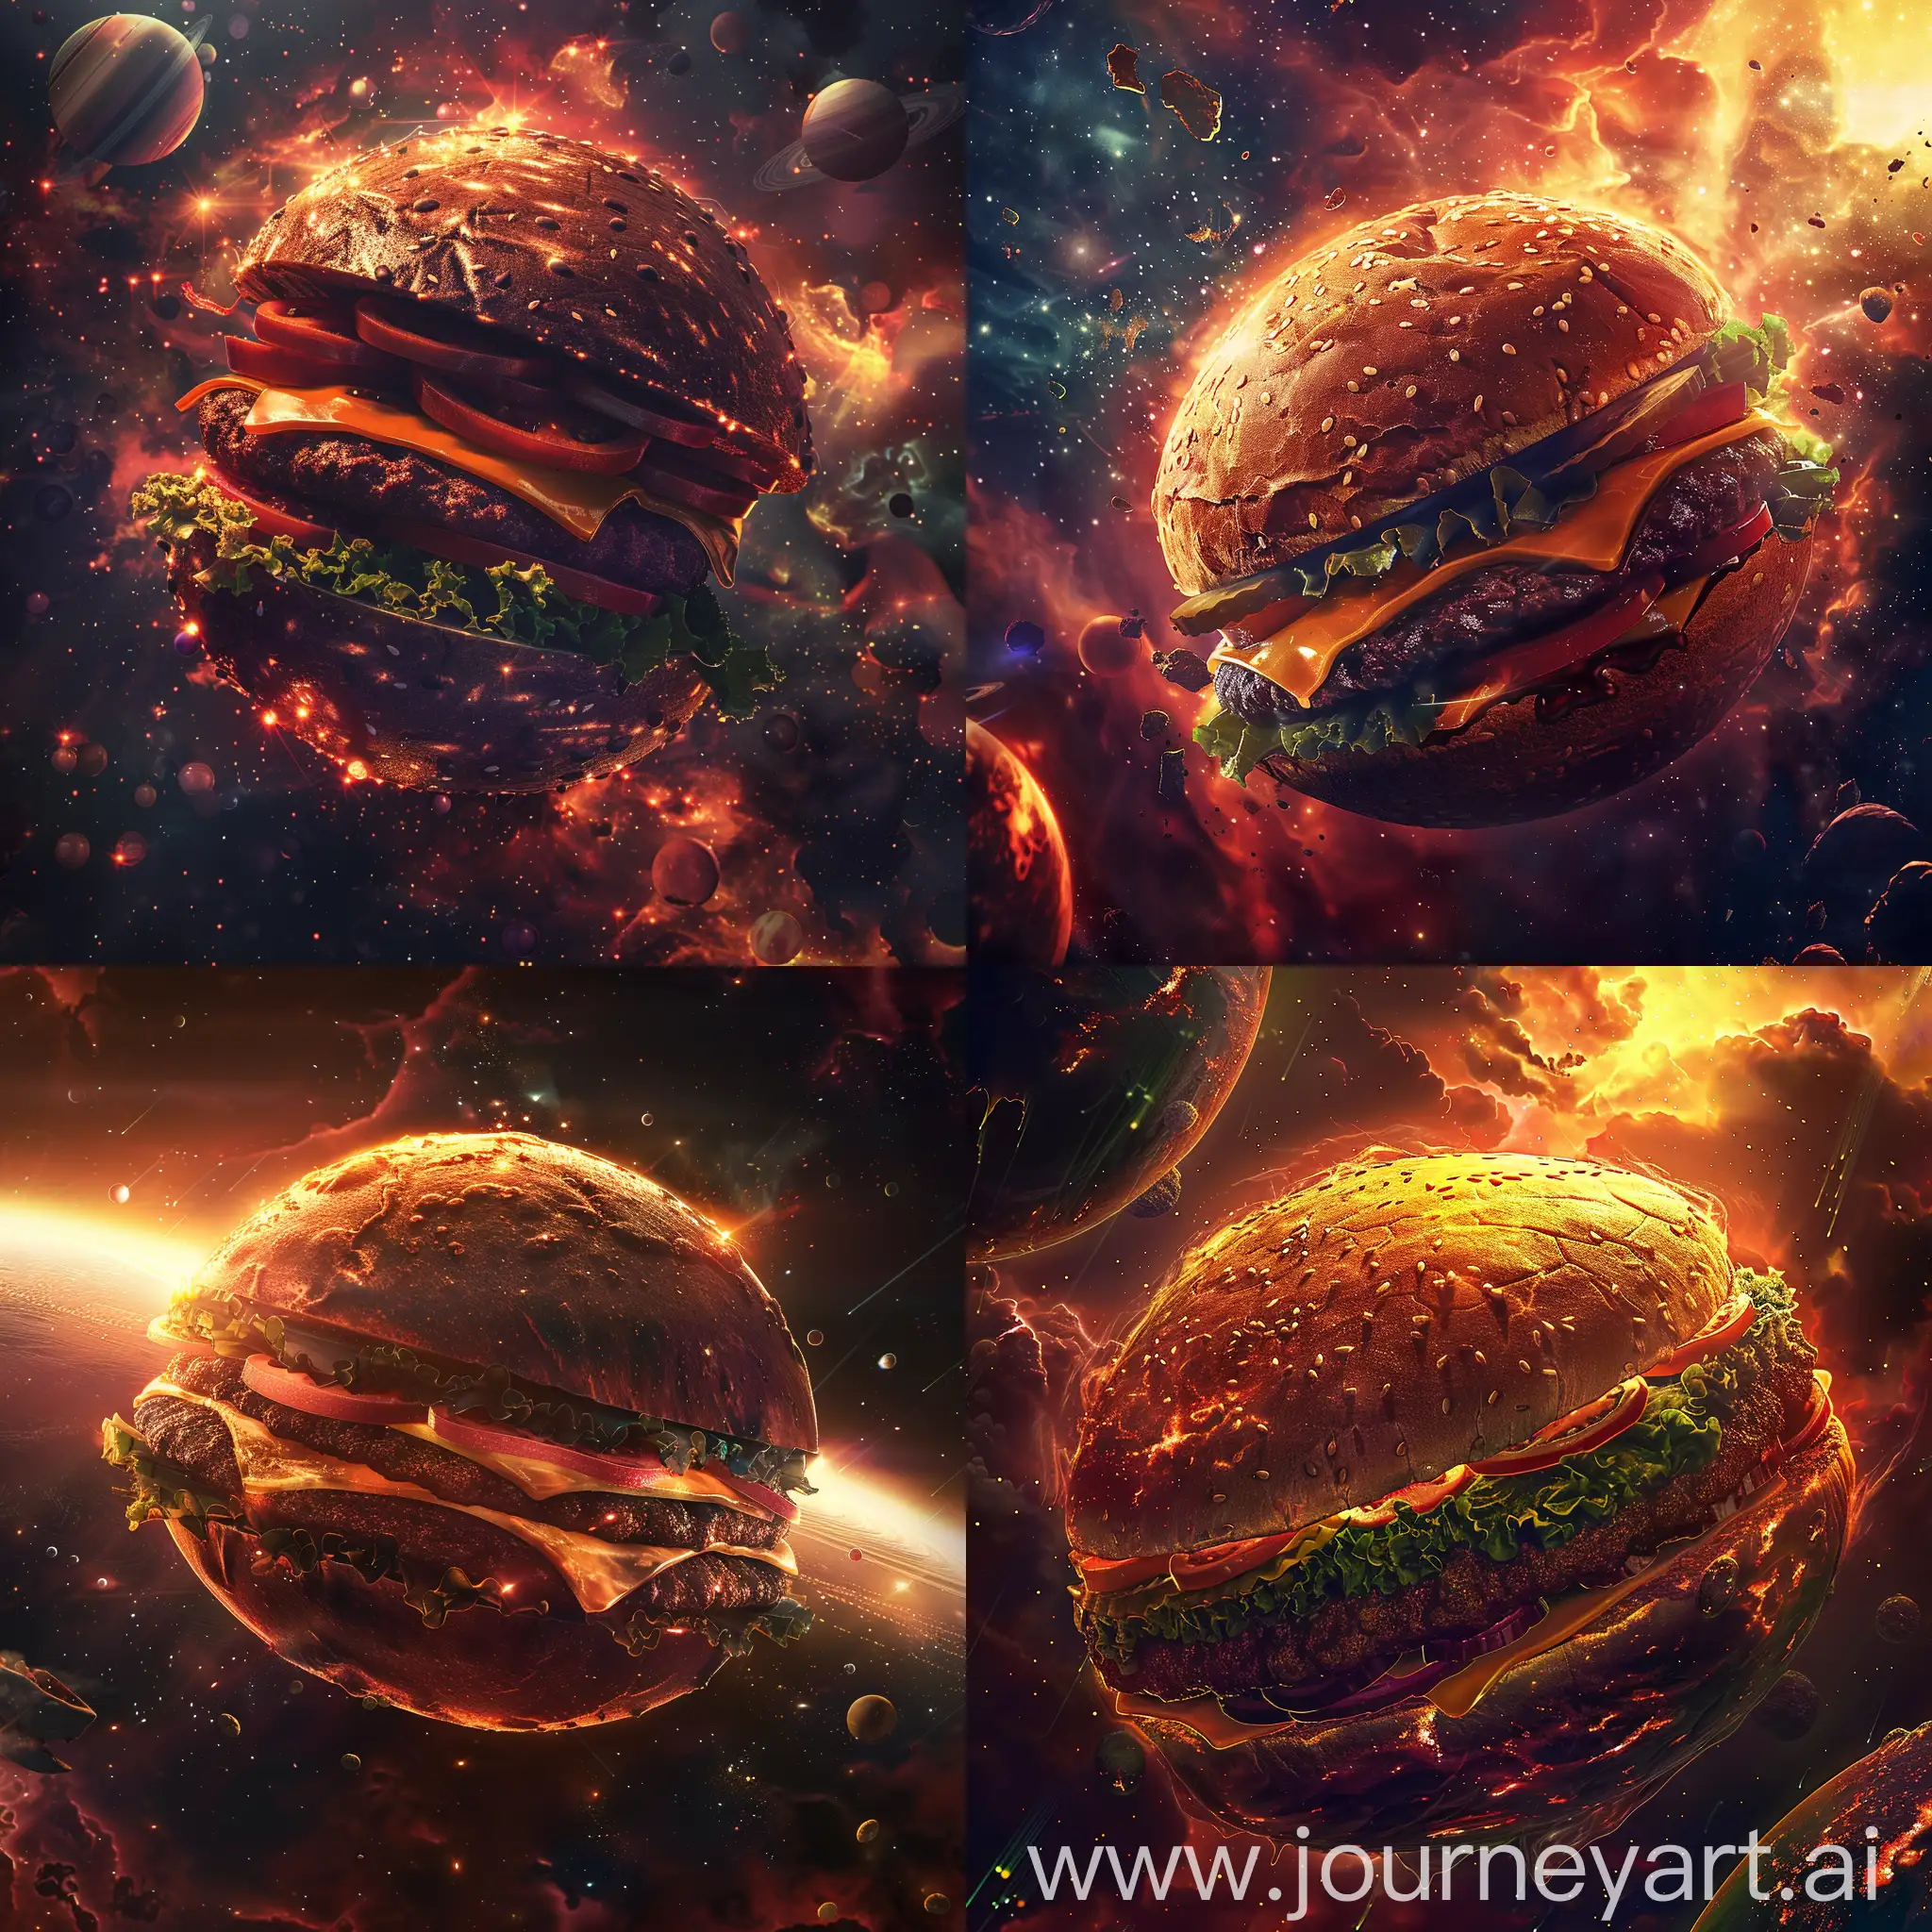 Celestial-Burger-A-Mouthwatering-Planet-in-Space